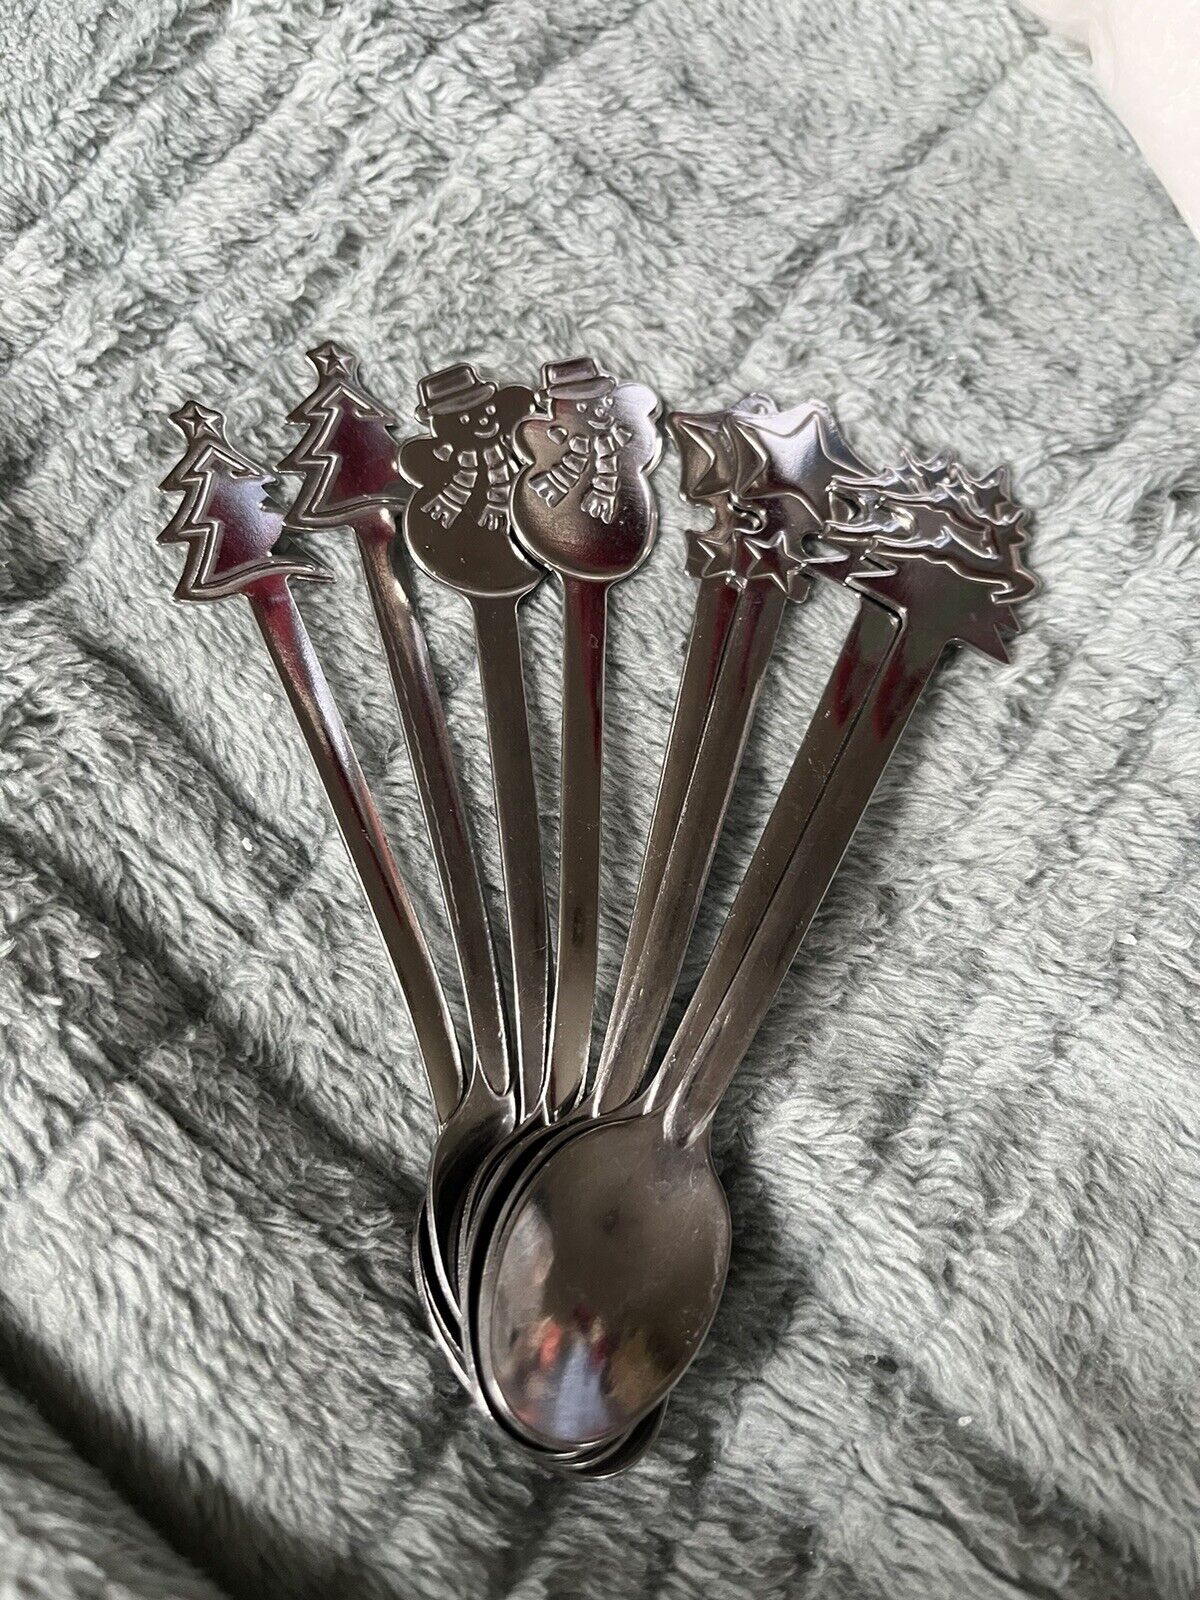 Yves Rocher Vintage Christmas Spoons Set 8 Roughly 5” Long- EUC